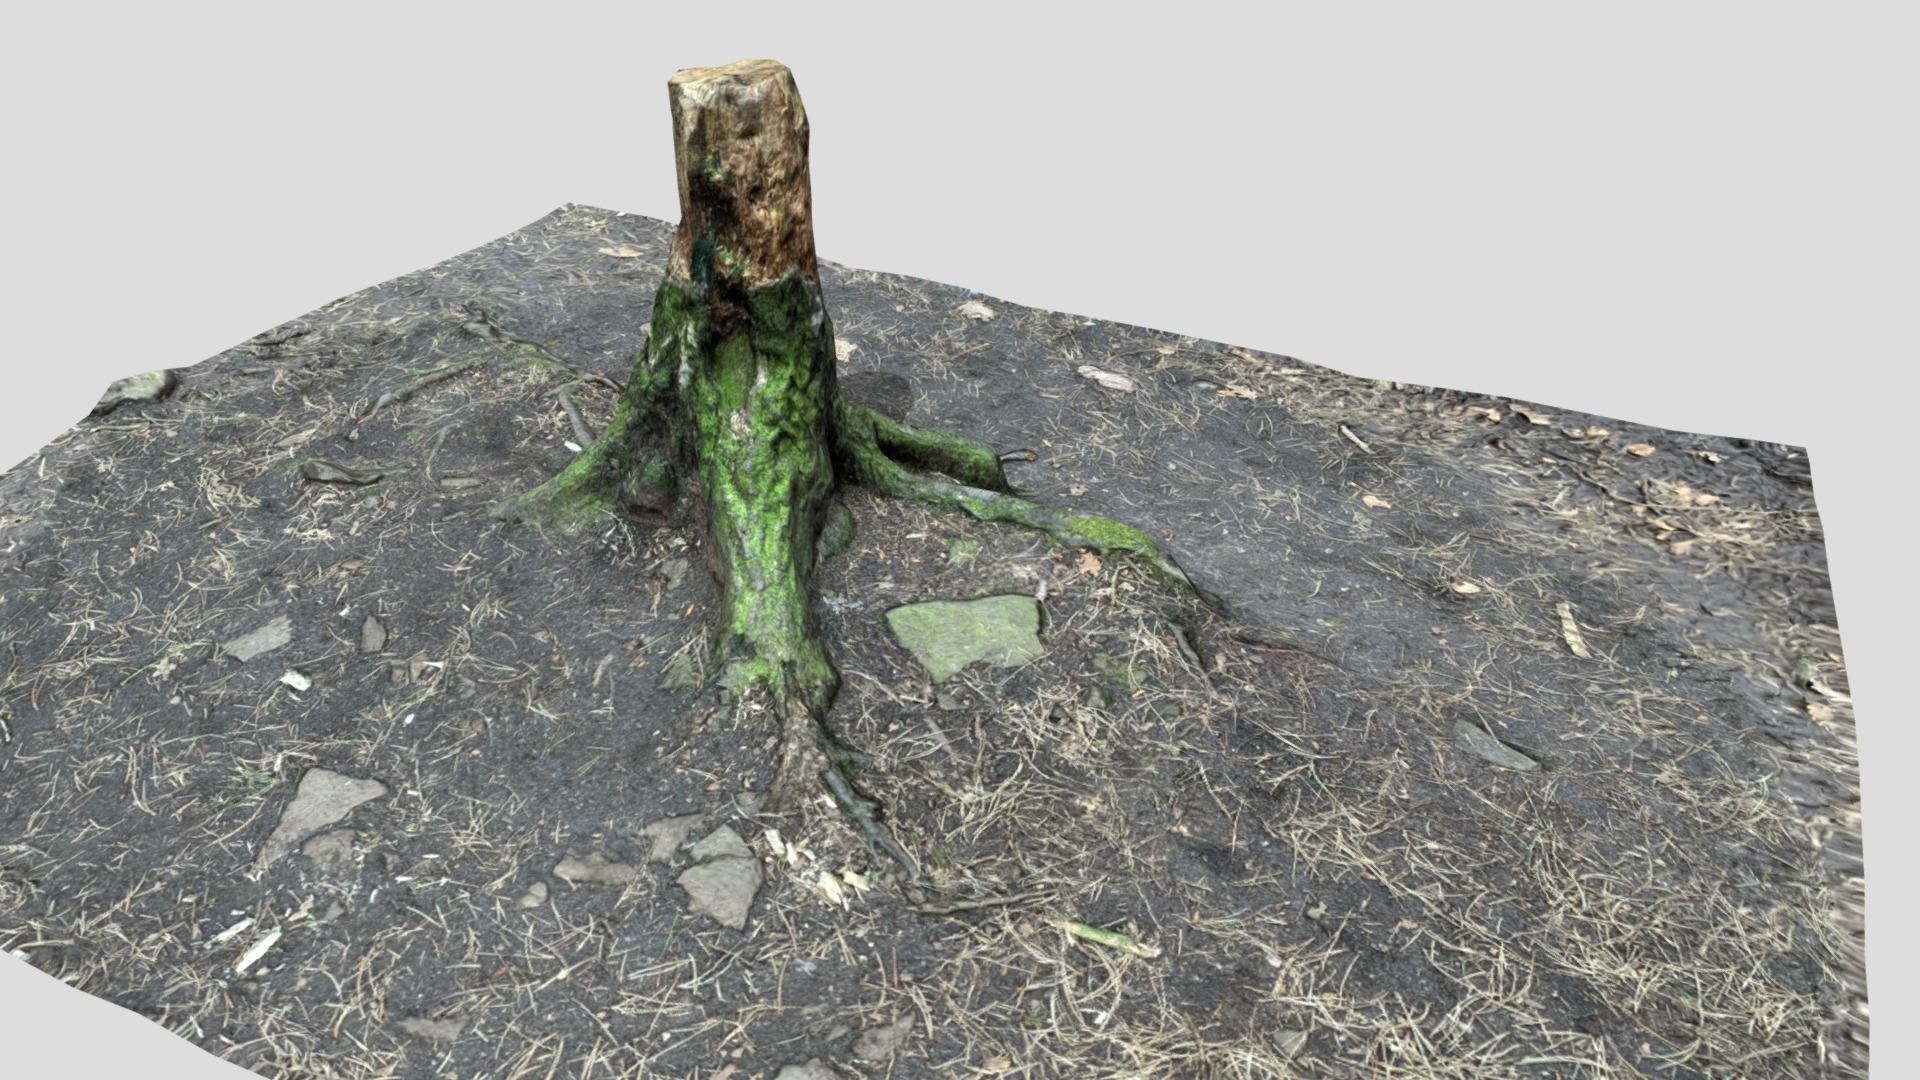 3D model Tree Stump – Low Poly – Maps: 2048 by 2048 - This is a 3D model of the Tree Stump - Low Poly - Maps: 2048 by 2048. The 3D model is about a green insect on a rock.